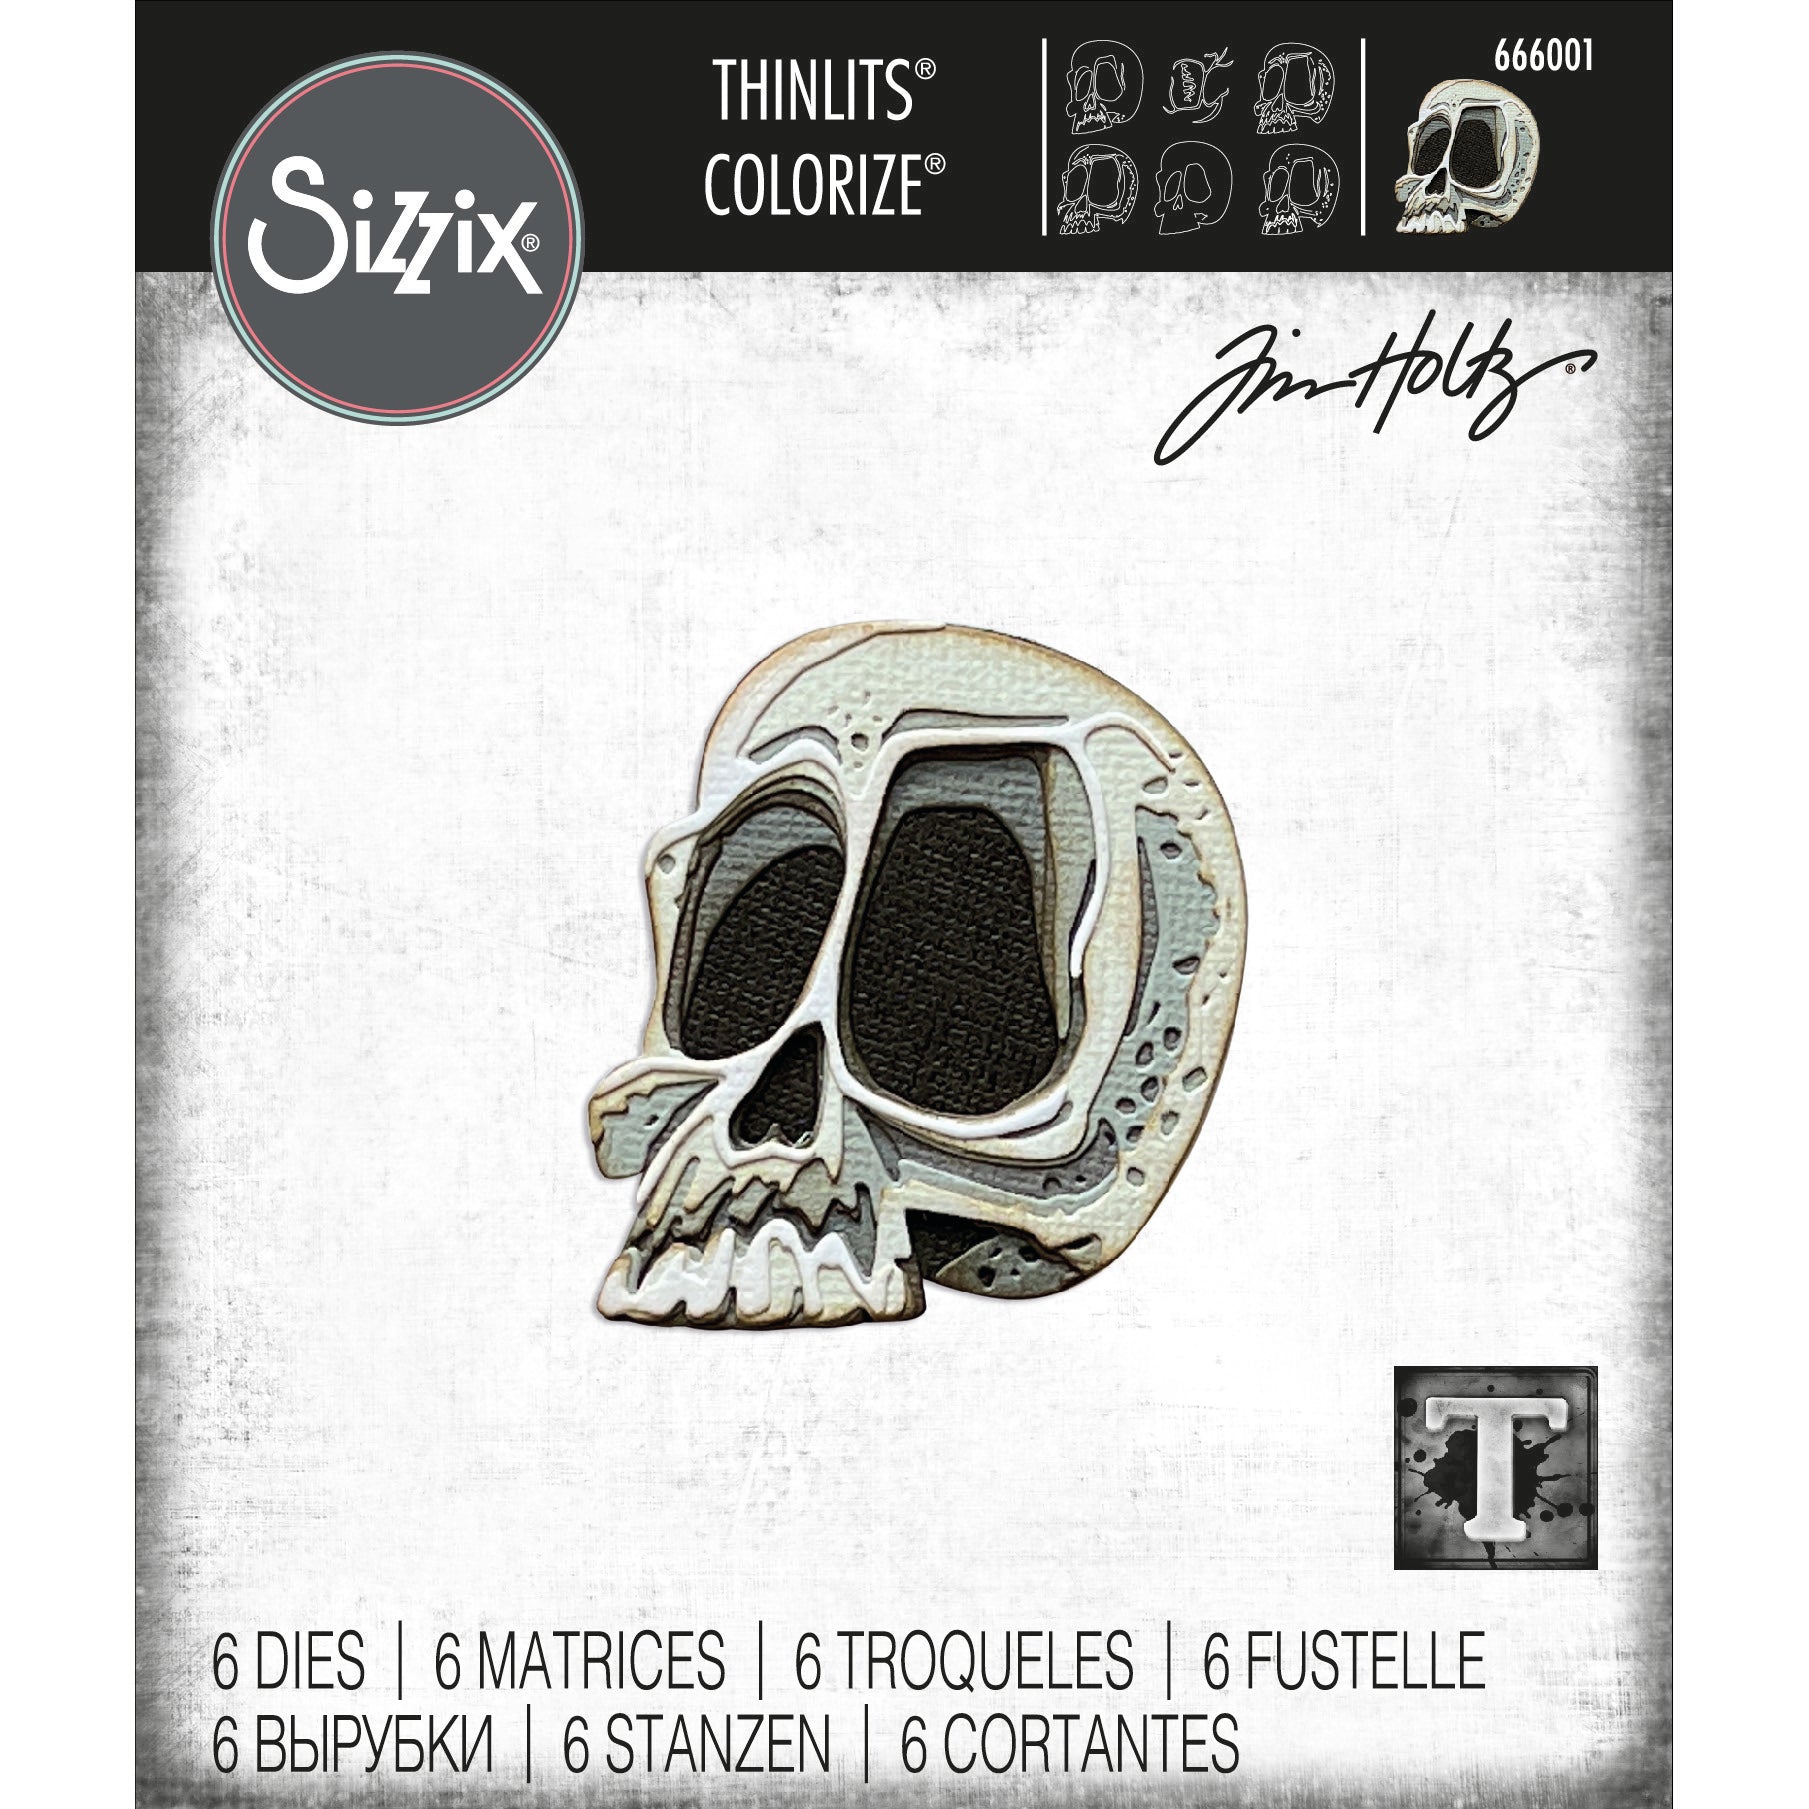 Sizzix Thinlits Die Set: Spencer Colorize, by Tim Holtz (666001)